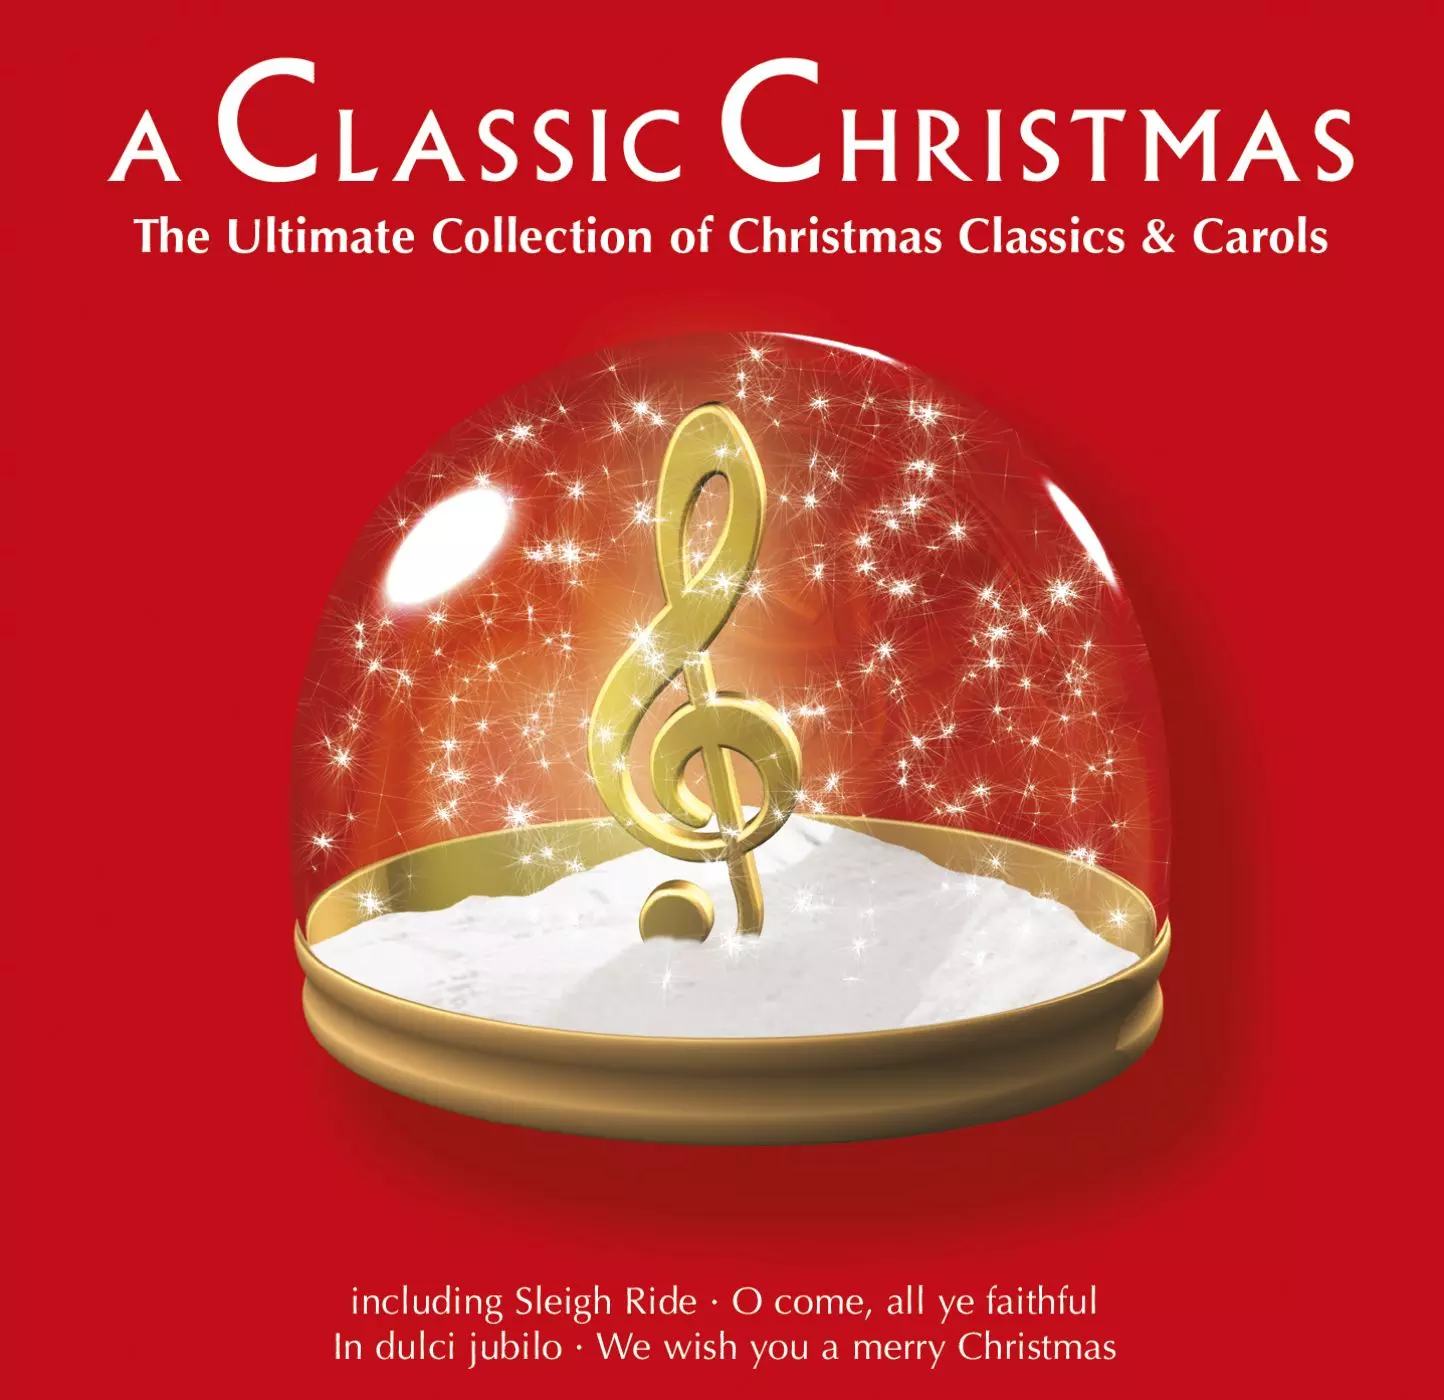 A Classic Christmas - The Ultimate Collection of Christmas Classics and Carols